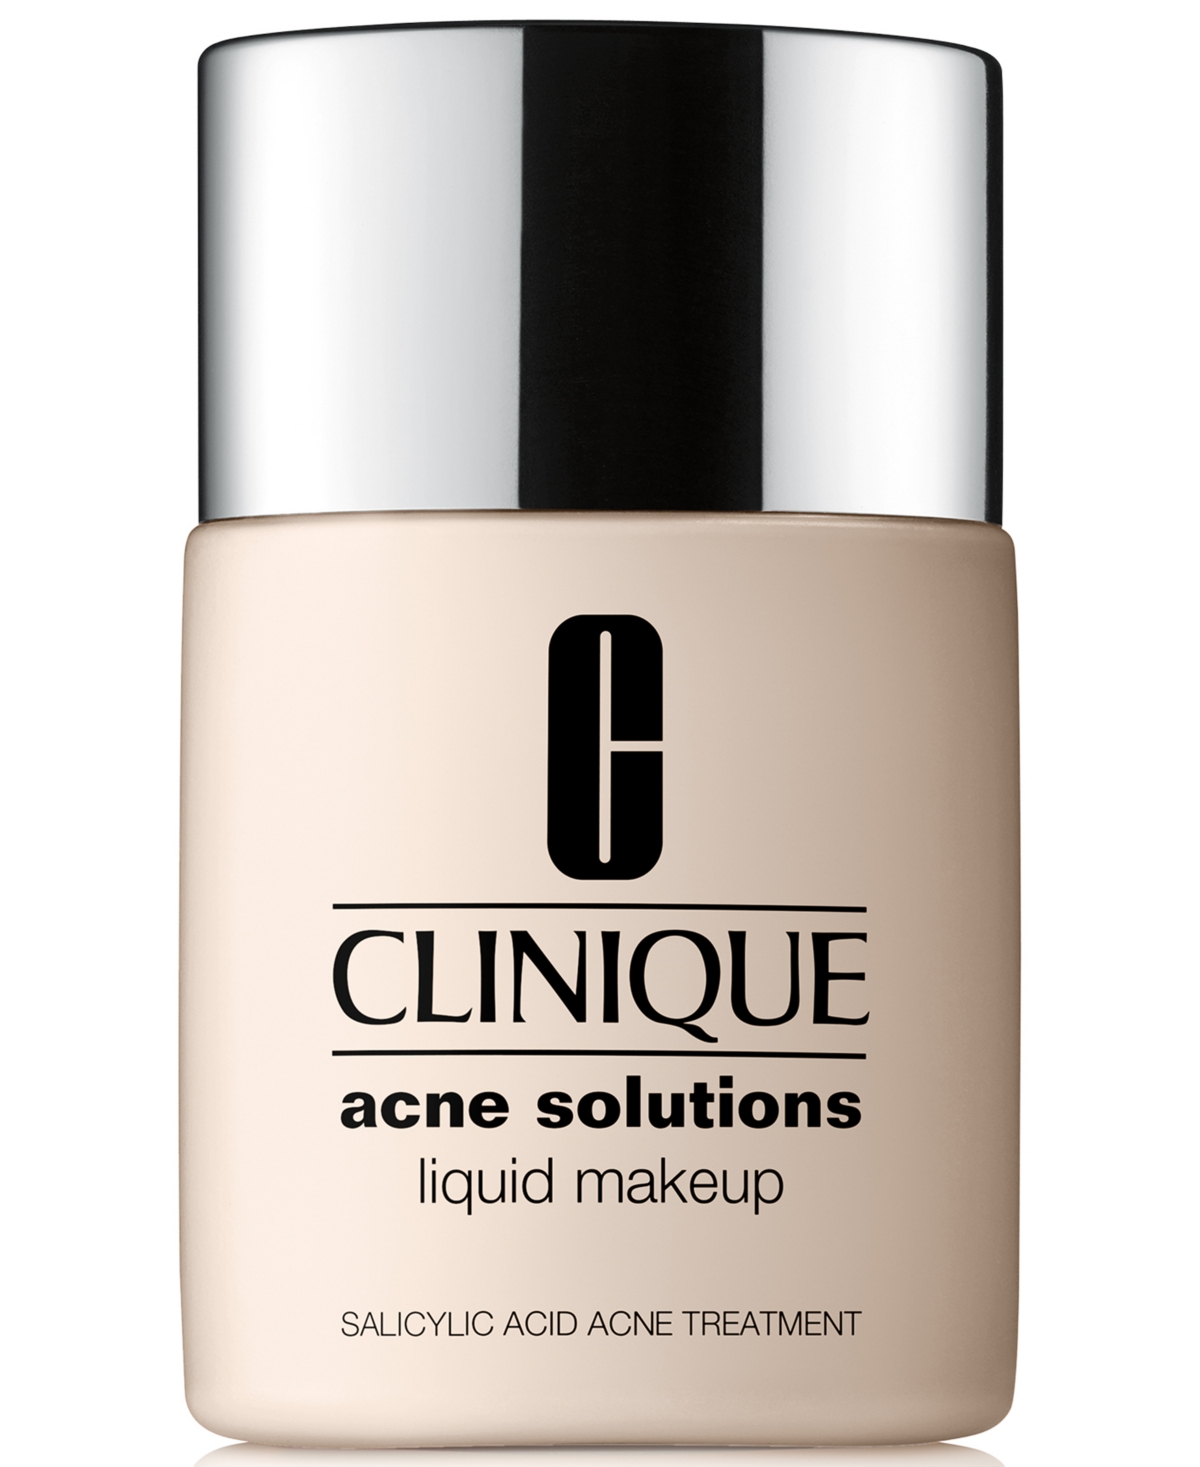 Clinique Acne Solutions Liquid Makeup Foundation, 1 Oz. In Flax